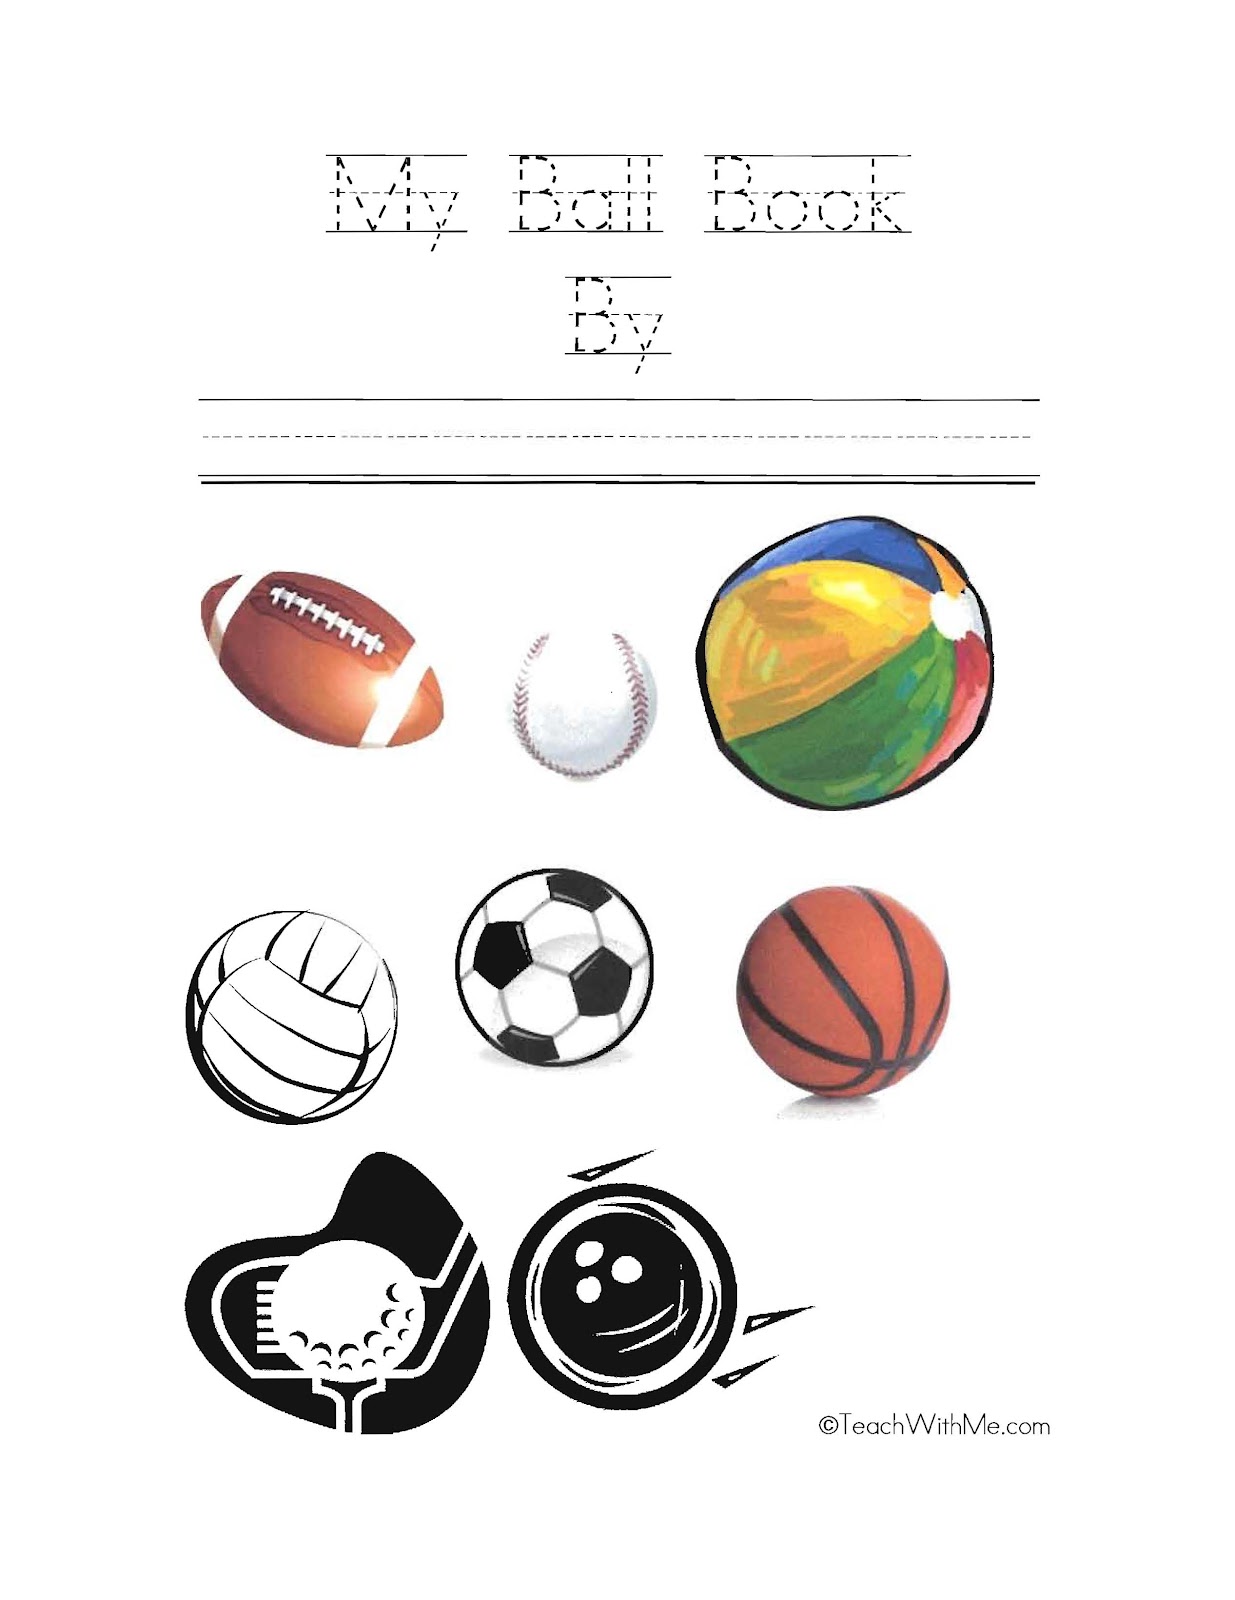 Learn Types of Balls in English! Types of Sports Balls Ball Names in  English For Everyone!⚽️⚾️🥎🏀🏐🏈🏉🏓